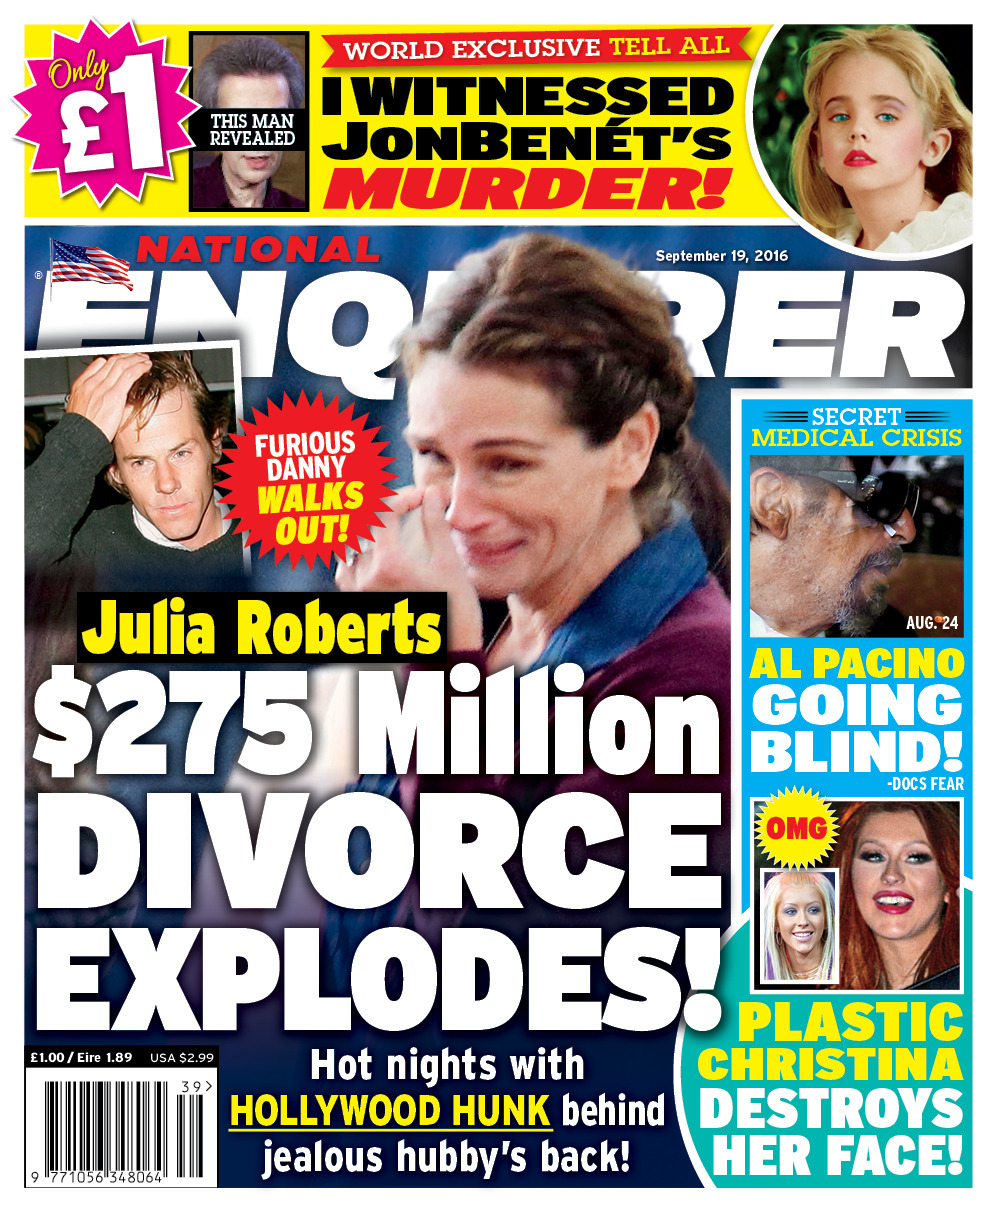 Julia Robert’s $275m divorce explodes! Read all about her hot nights with a Hollywood hunk behind jealous hubby’s back in the latest issue of the National Enquirer on sale now, go here to find your nearest stockist